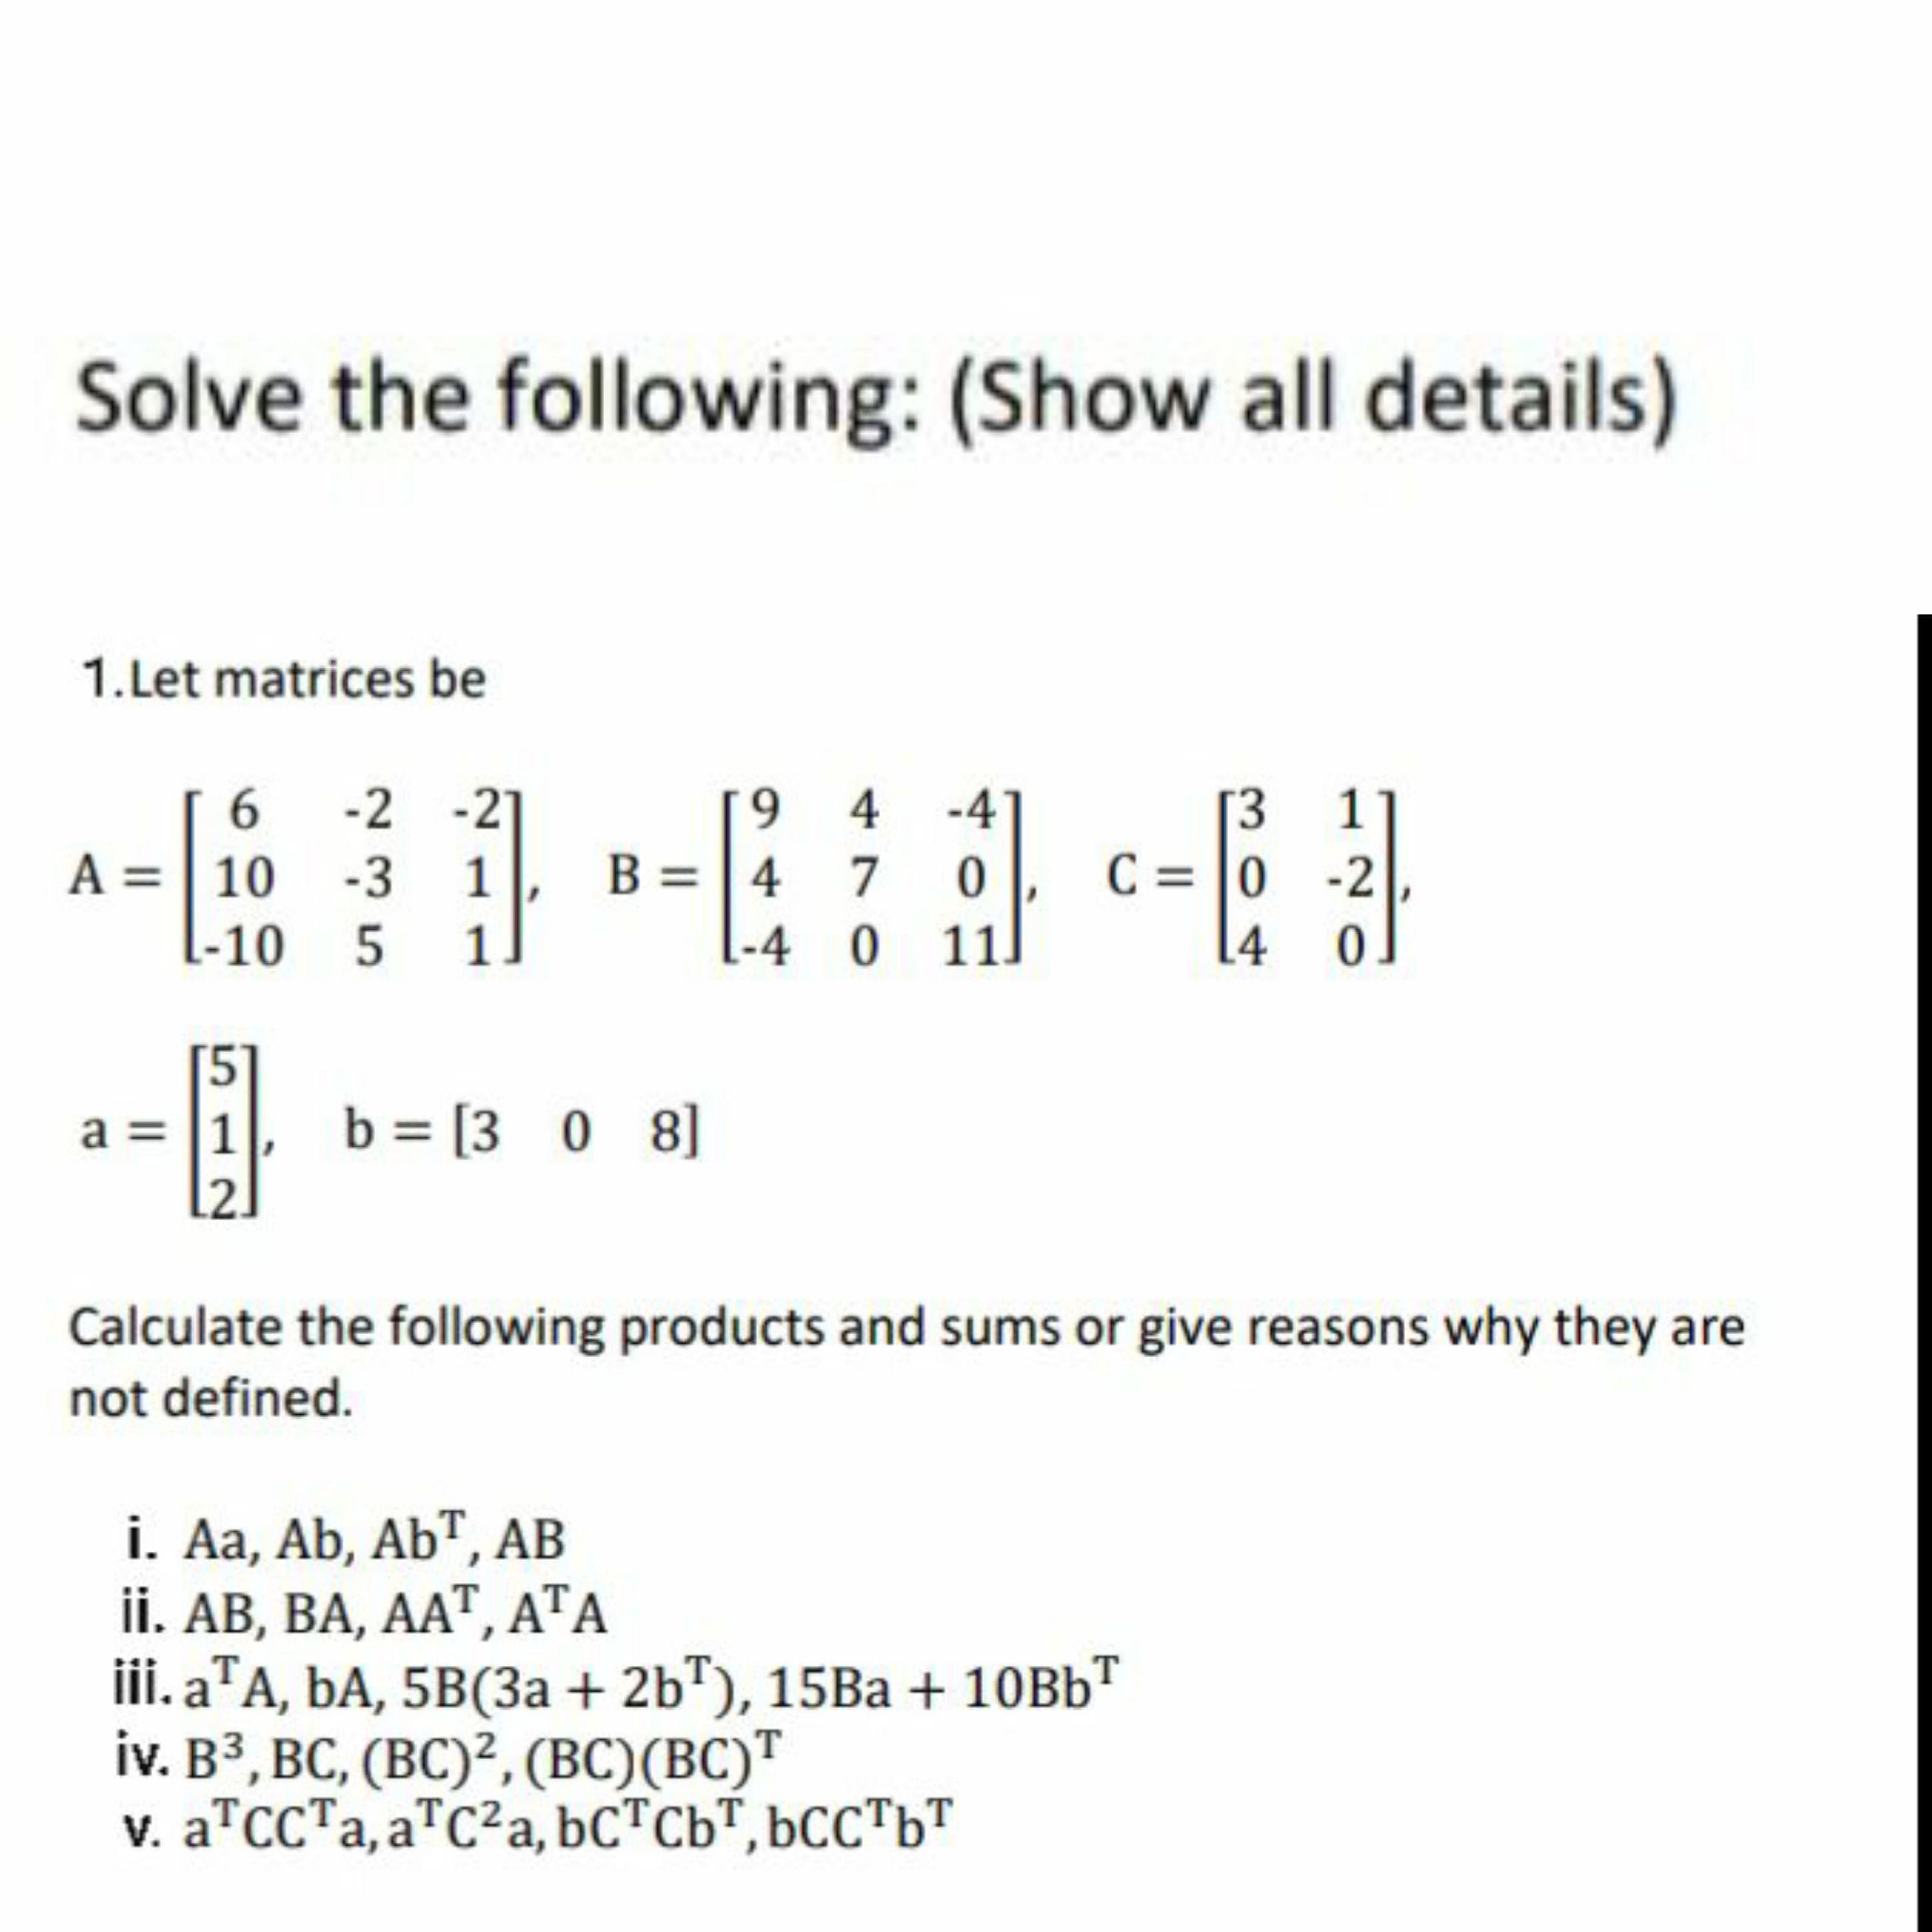 1.Let matrices be
19 4 -4
B = | 4 7
[-4 0 11]
-2 -21
1
[3
C = 0 -2
A =| 10 -3 1
L-10 5
1
[4
a = |1
b = [3 0 8]
.2.
Calculate the following products and sums or give reasons why they are
not defined.
i. Aa, Ab, AbT, AB
